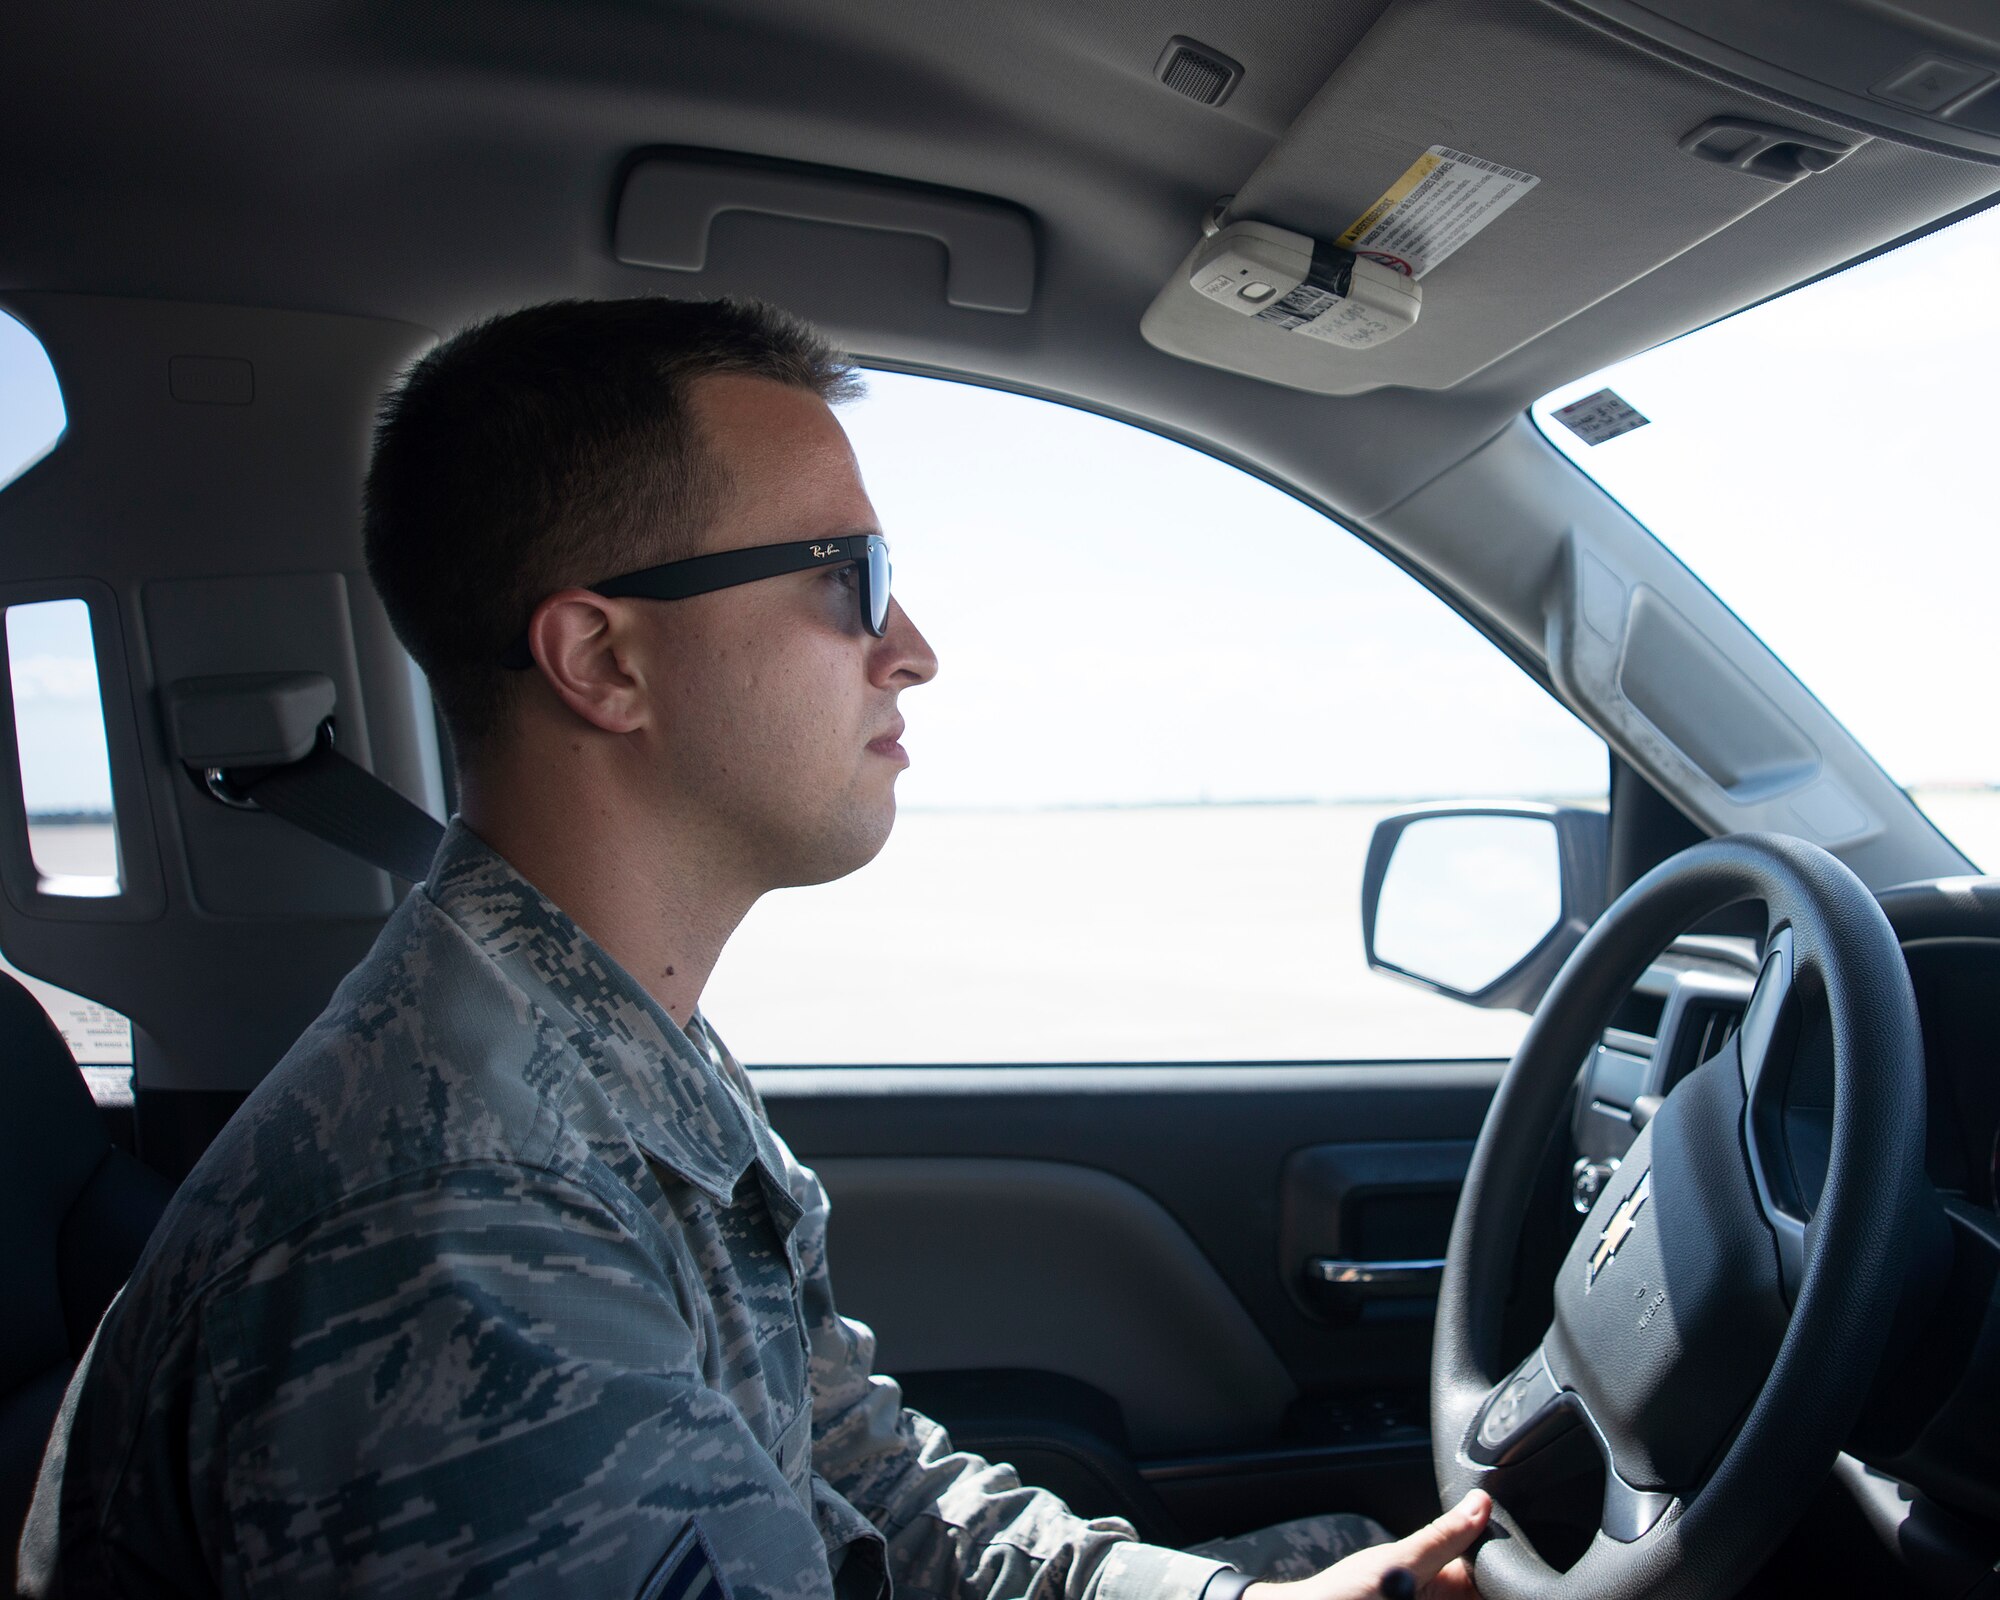 U.S Air Force Airman 1st Class Sean Holly, an airfield manager assigned to the 6th Operation Support Squadron, drives at truck on the flightline at MacDill Air Force Base, Florida, Sept. 28, 2018.